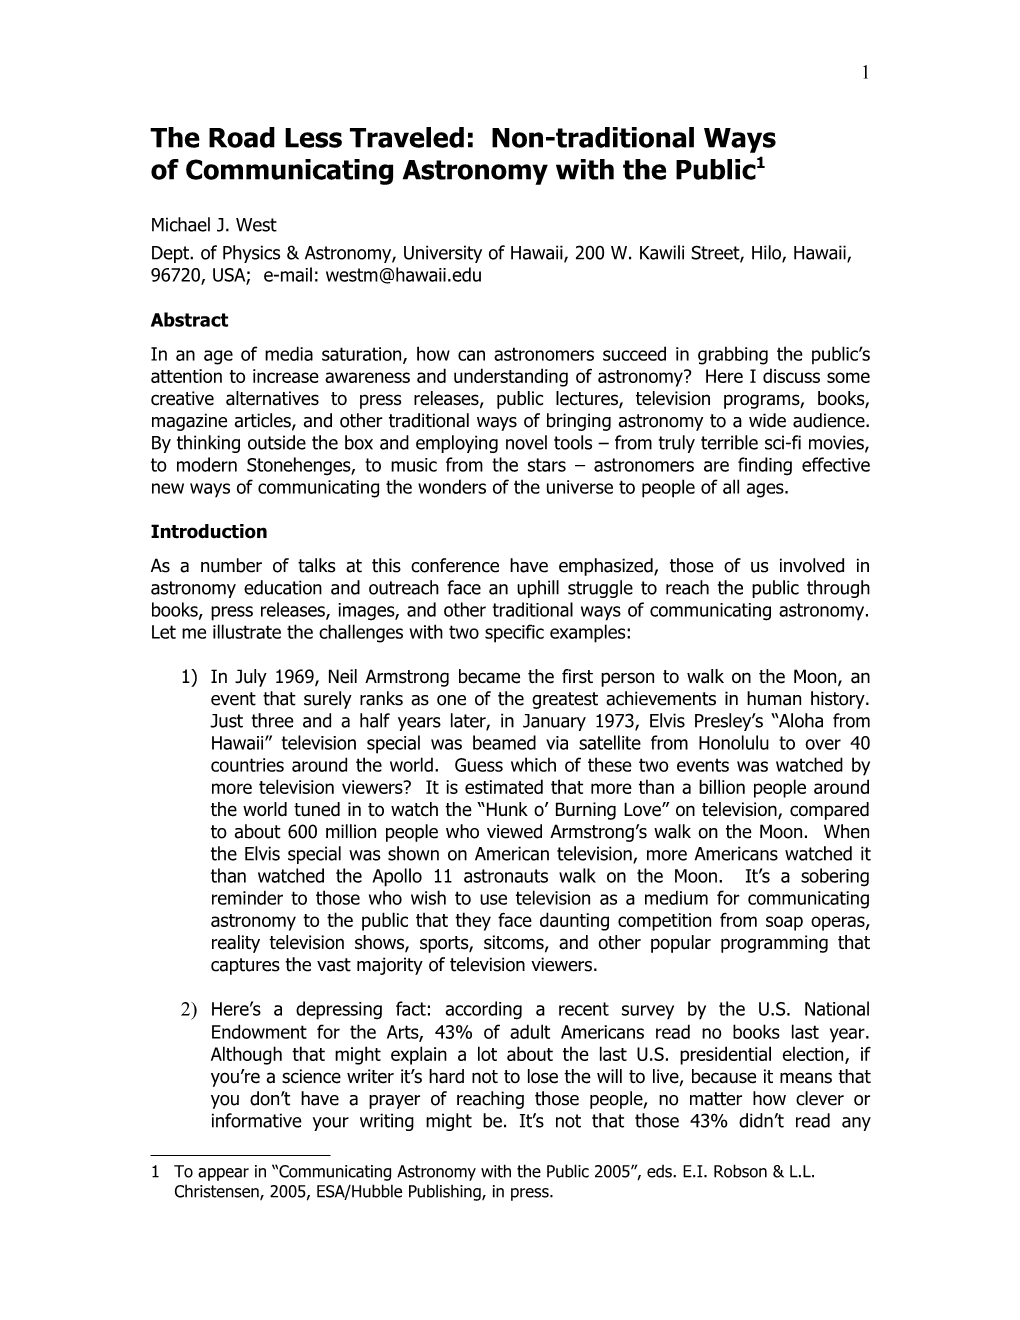 Non-Traditional Ways of Communicating Astronomy with the Public1